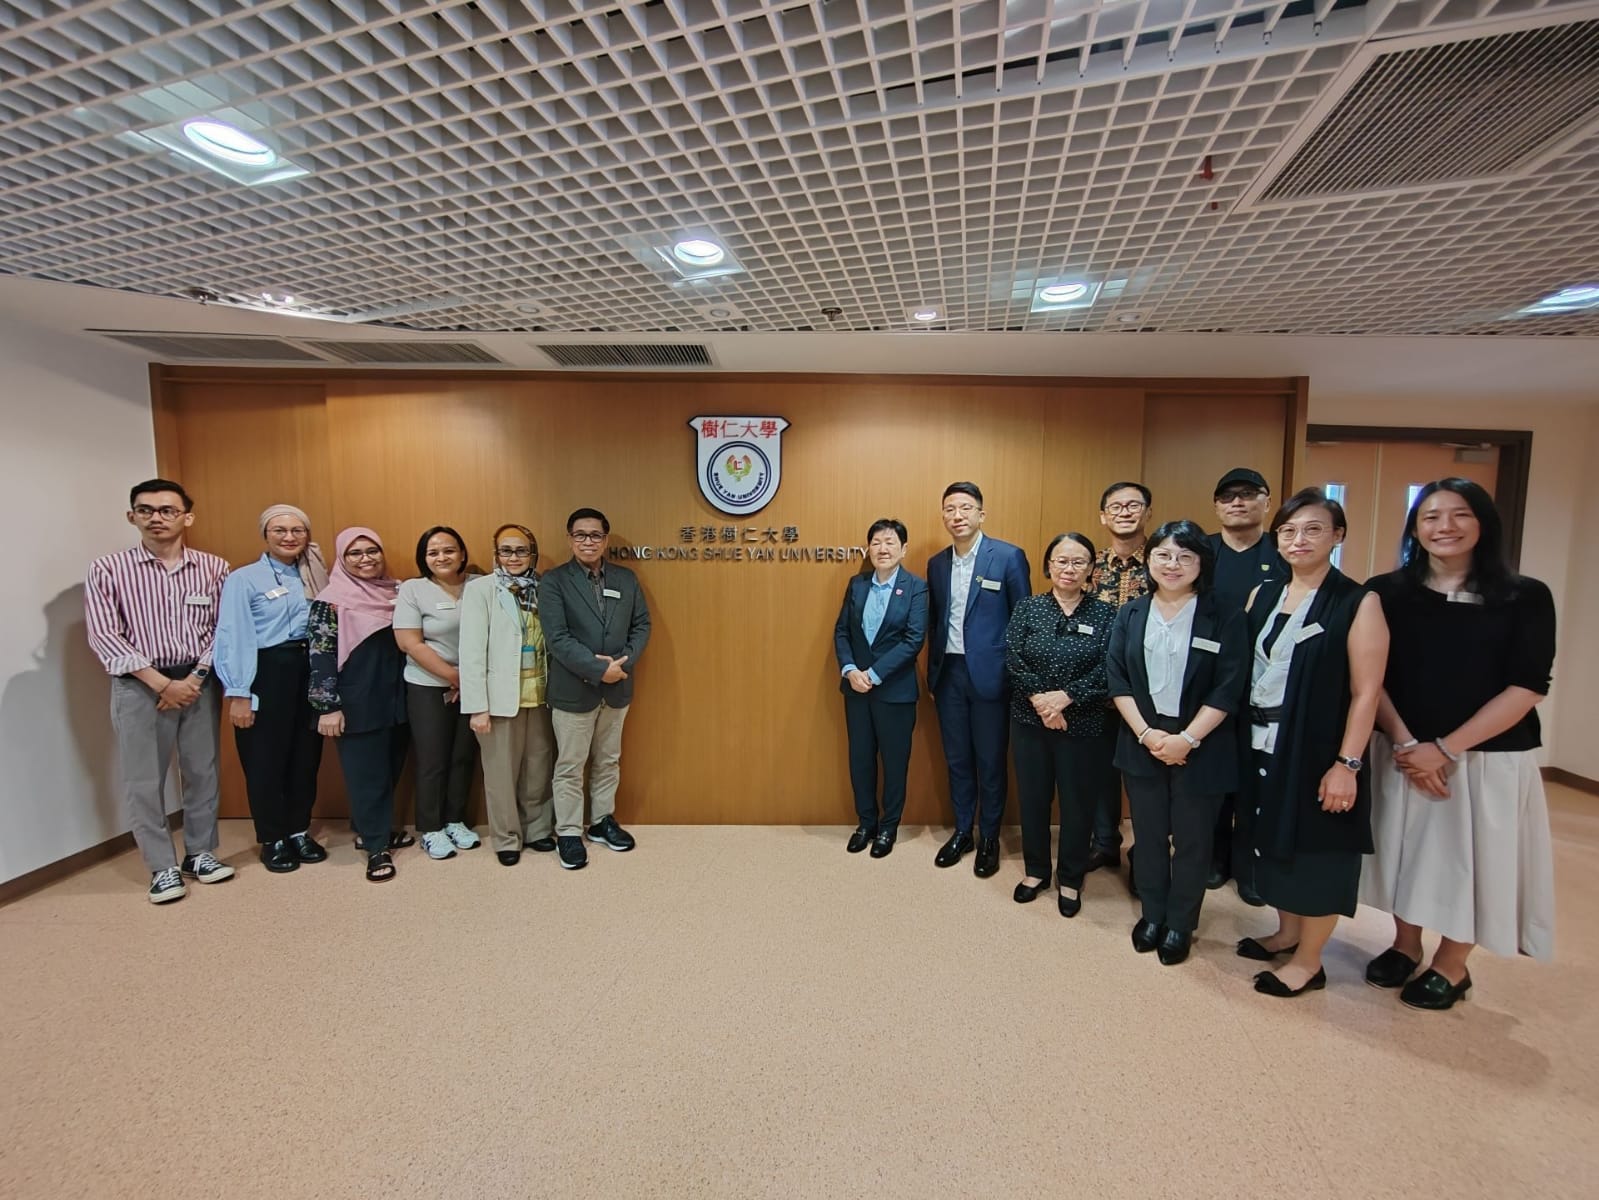 Representatives of the Indonesian Consulate General visited SYU to learn more about programmes and cultural exchange.